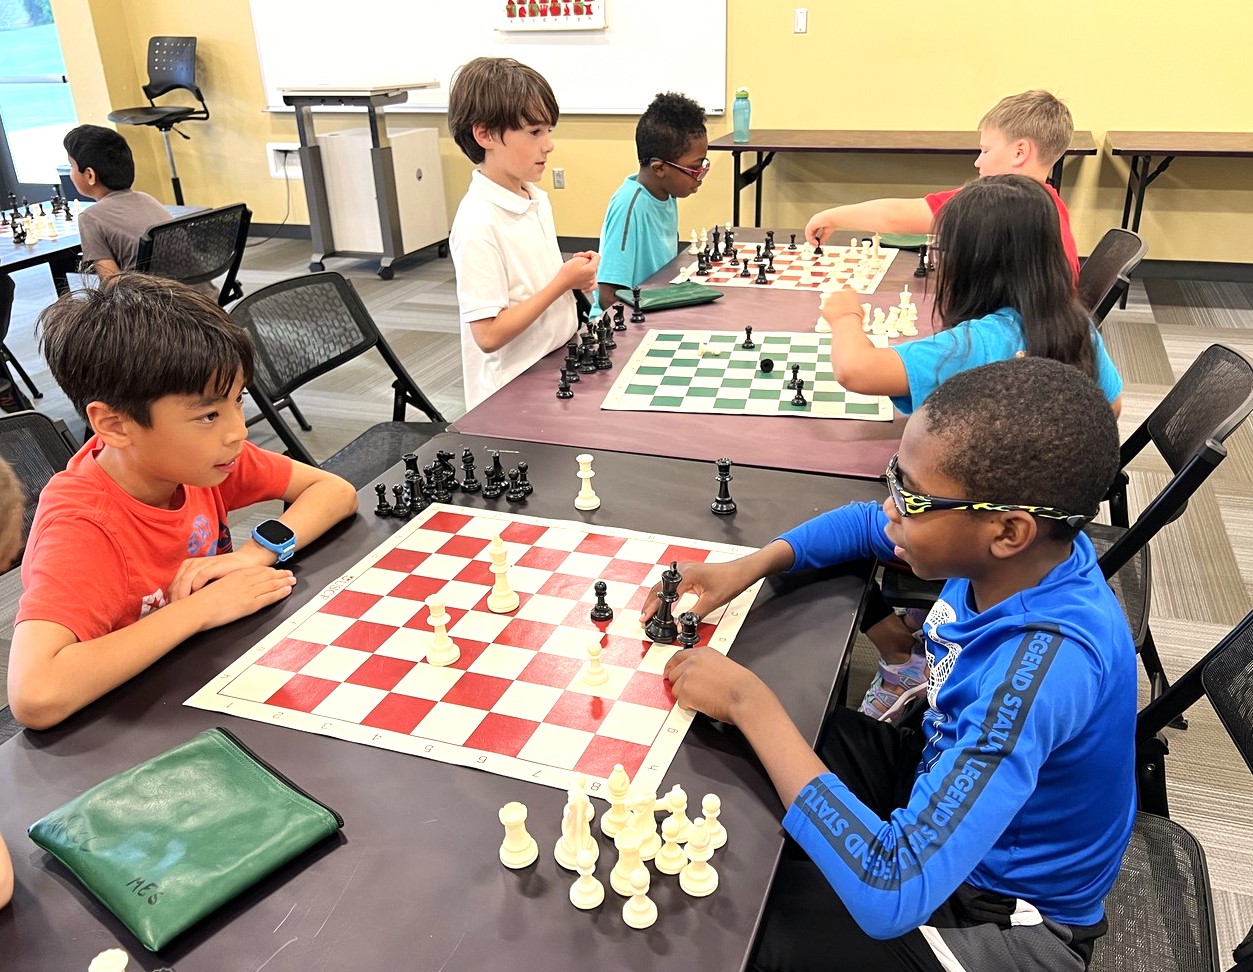 Summer Chess Camp open to all ages, skill levels The Madison Record